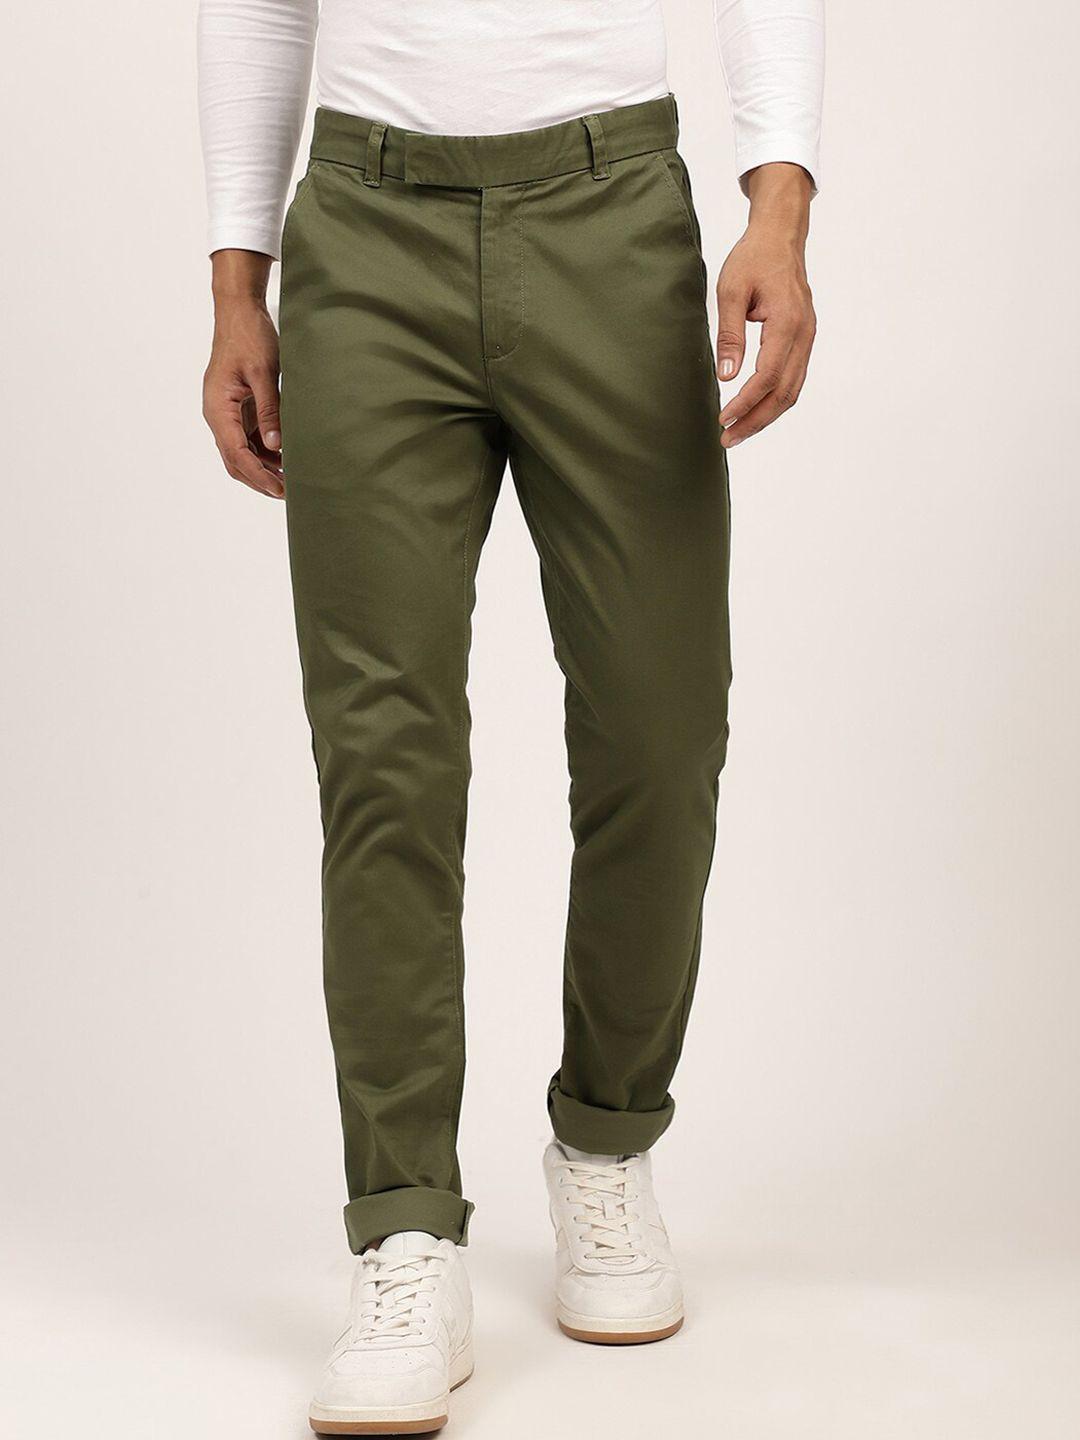 harsam men olive green chinos trousers